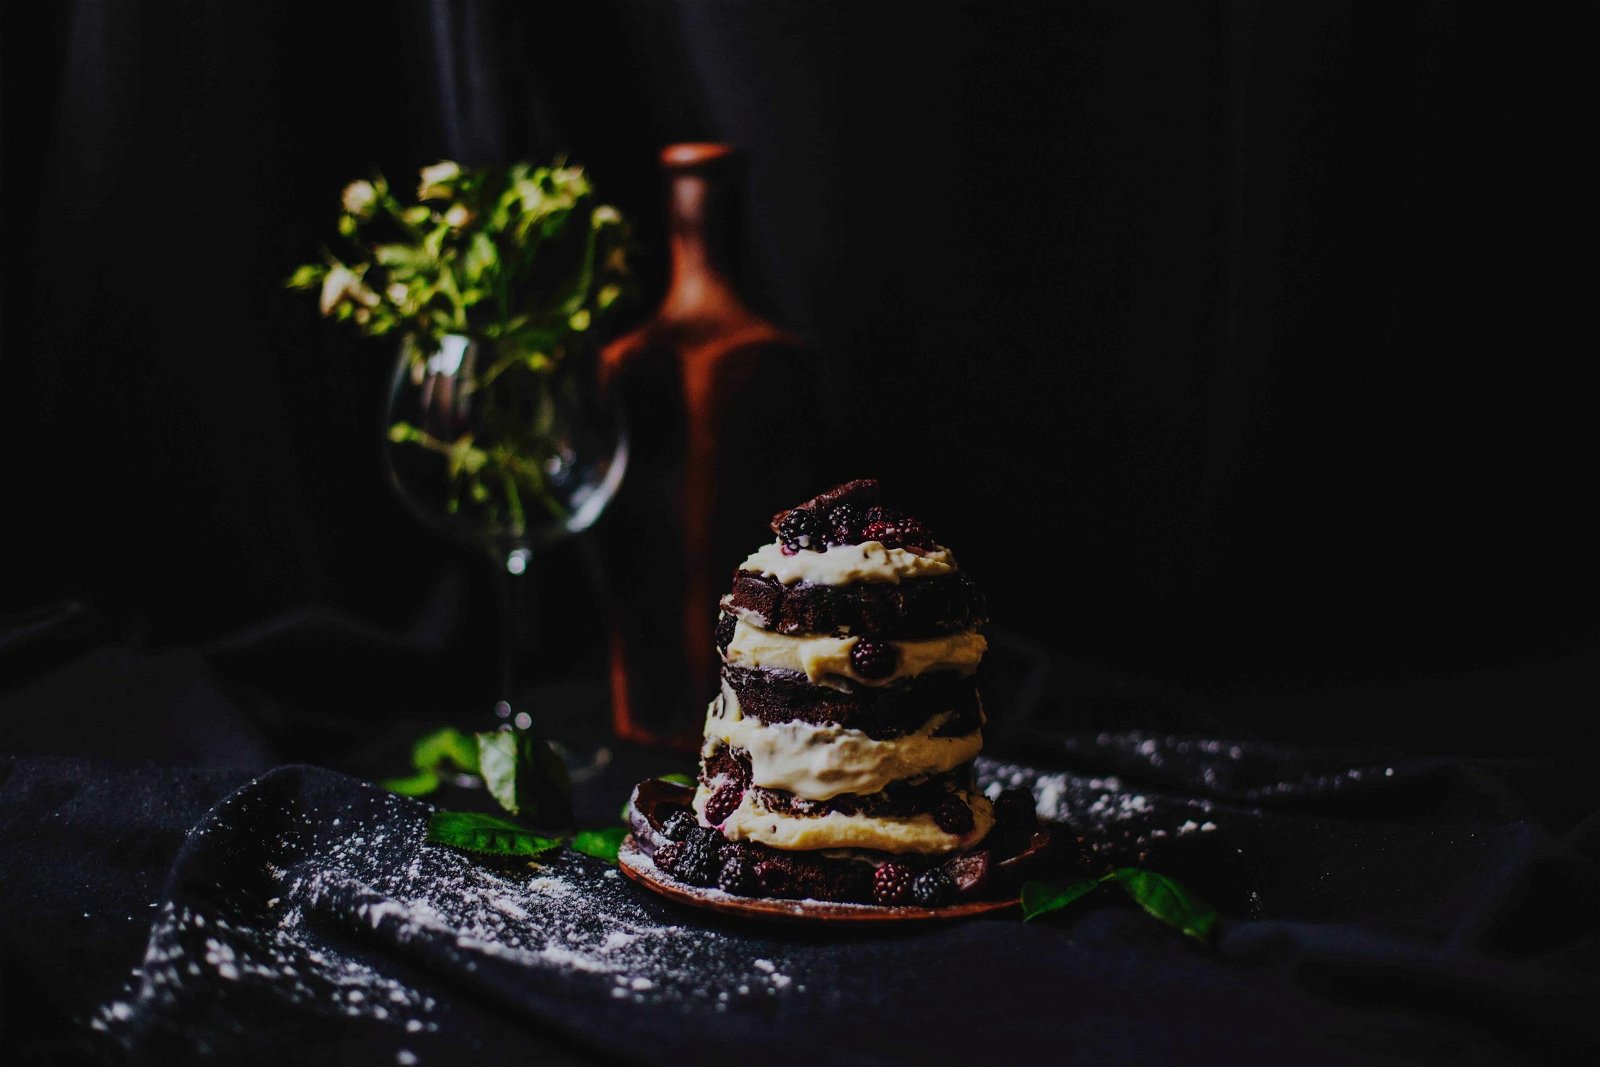 Using a dark board in food photography setup can create more contrast and shadows as seen in this image of dessert